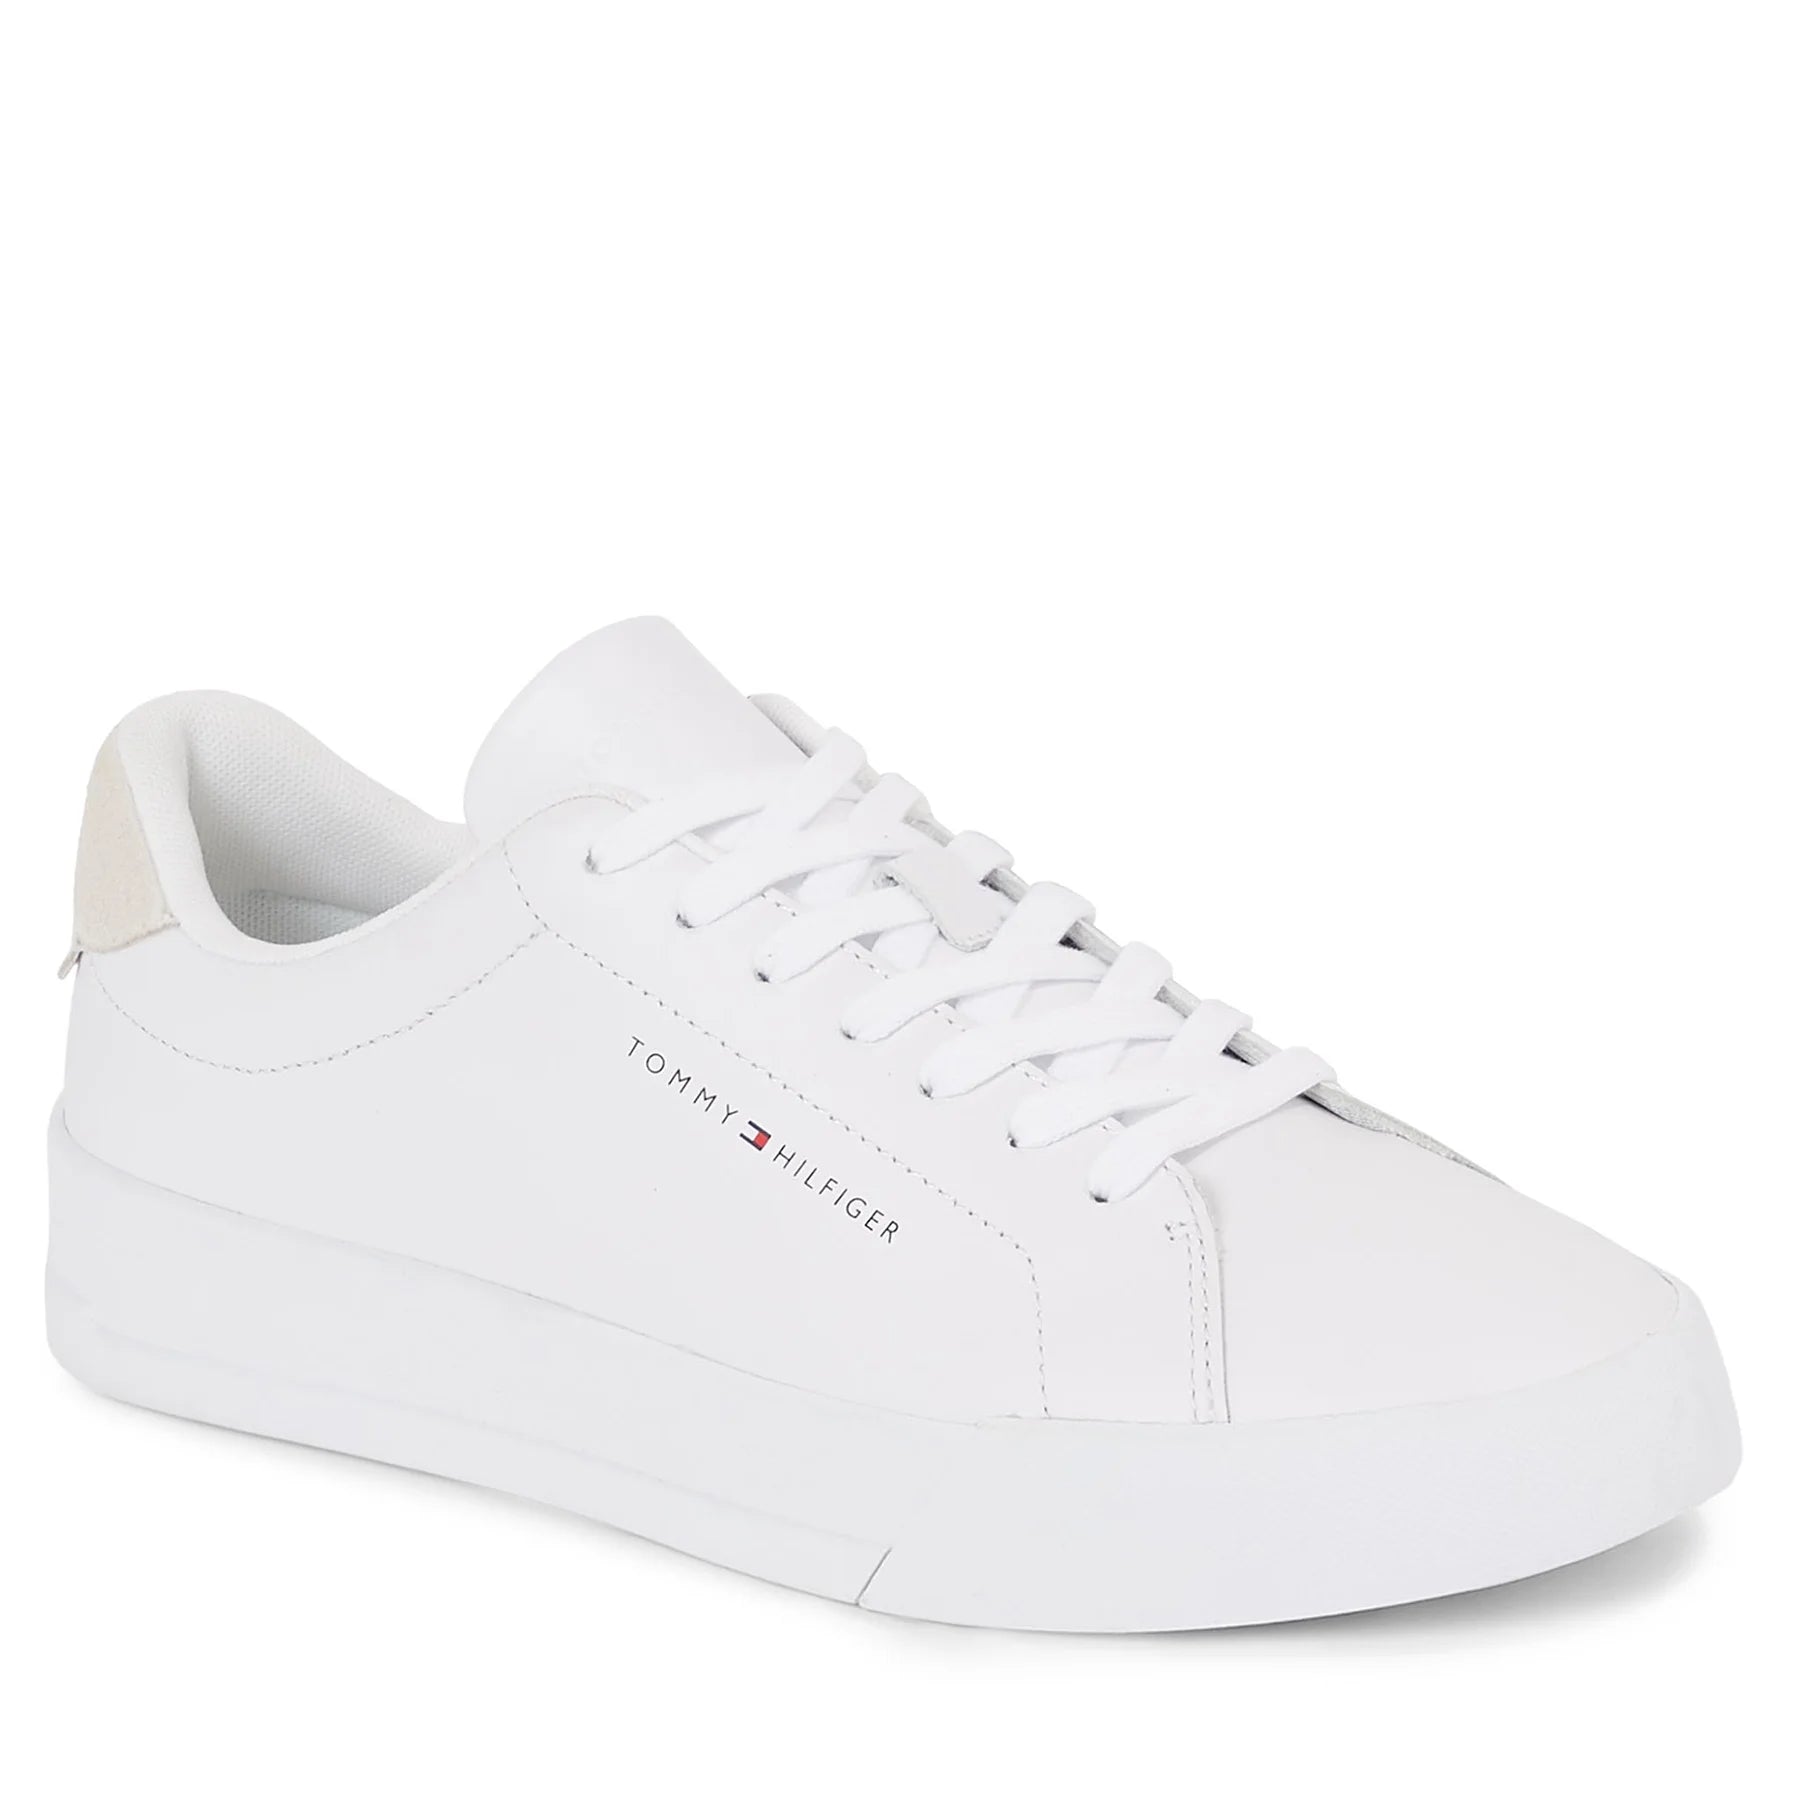 IkvDEGBJMOo8nULPsneakers-tommy-hilfiger-th-court-leather-fm0fm04971-white-ybs-00003037729189.jpg